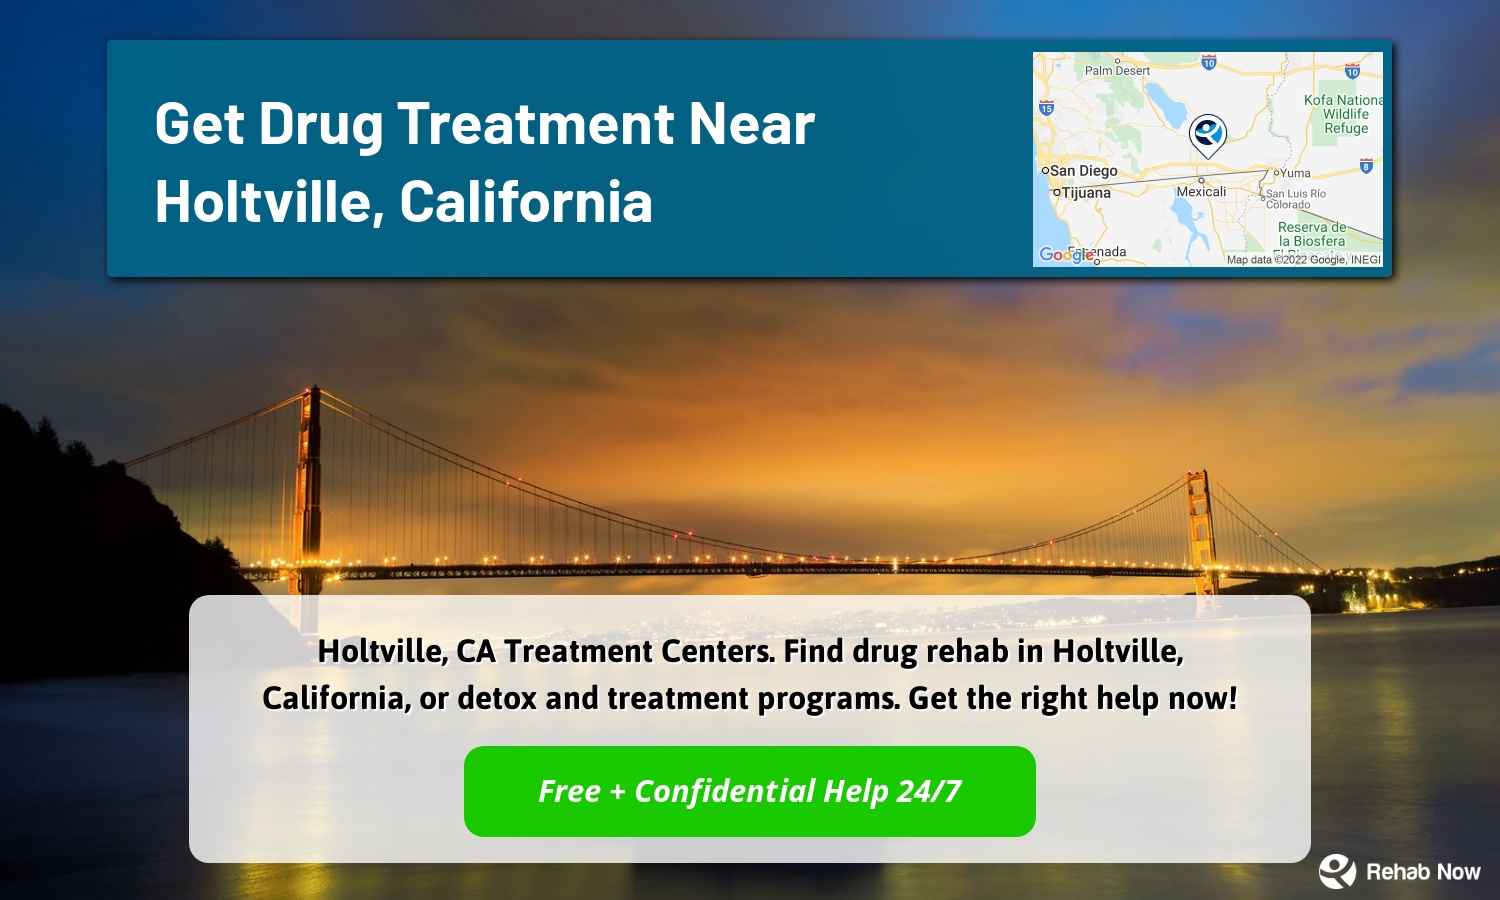 Holtville, CA Treatment Centers. Find drug rehab in Holtville, California, or detox and treatment programs. Get the right help now!